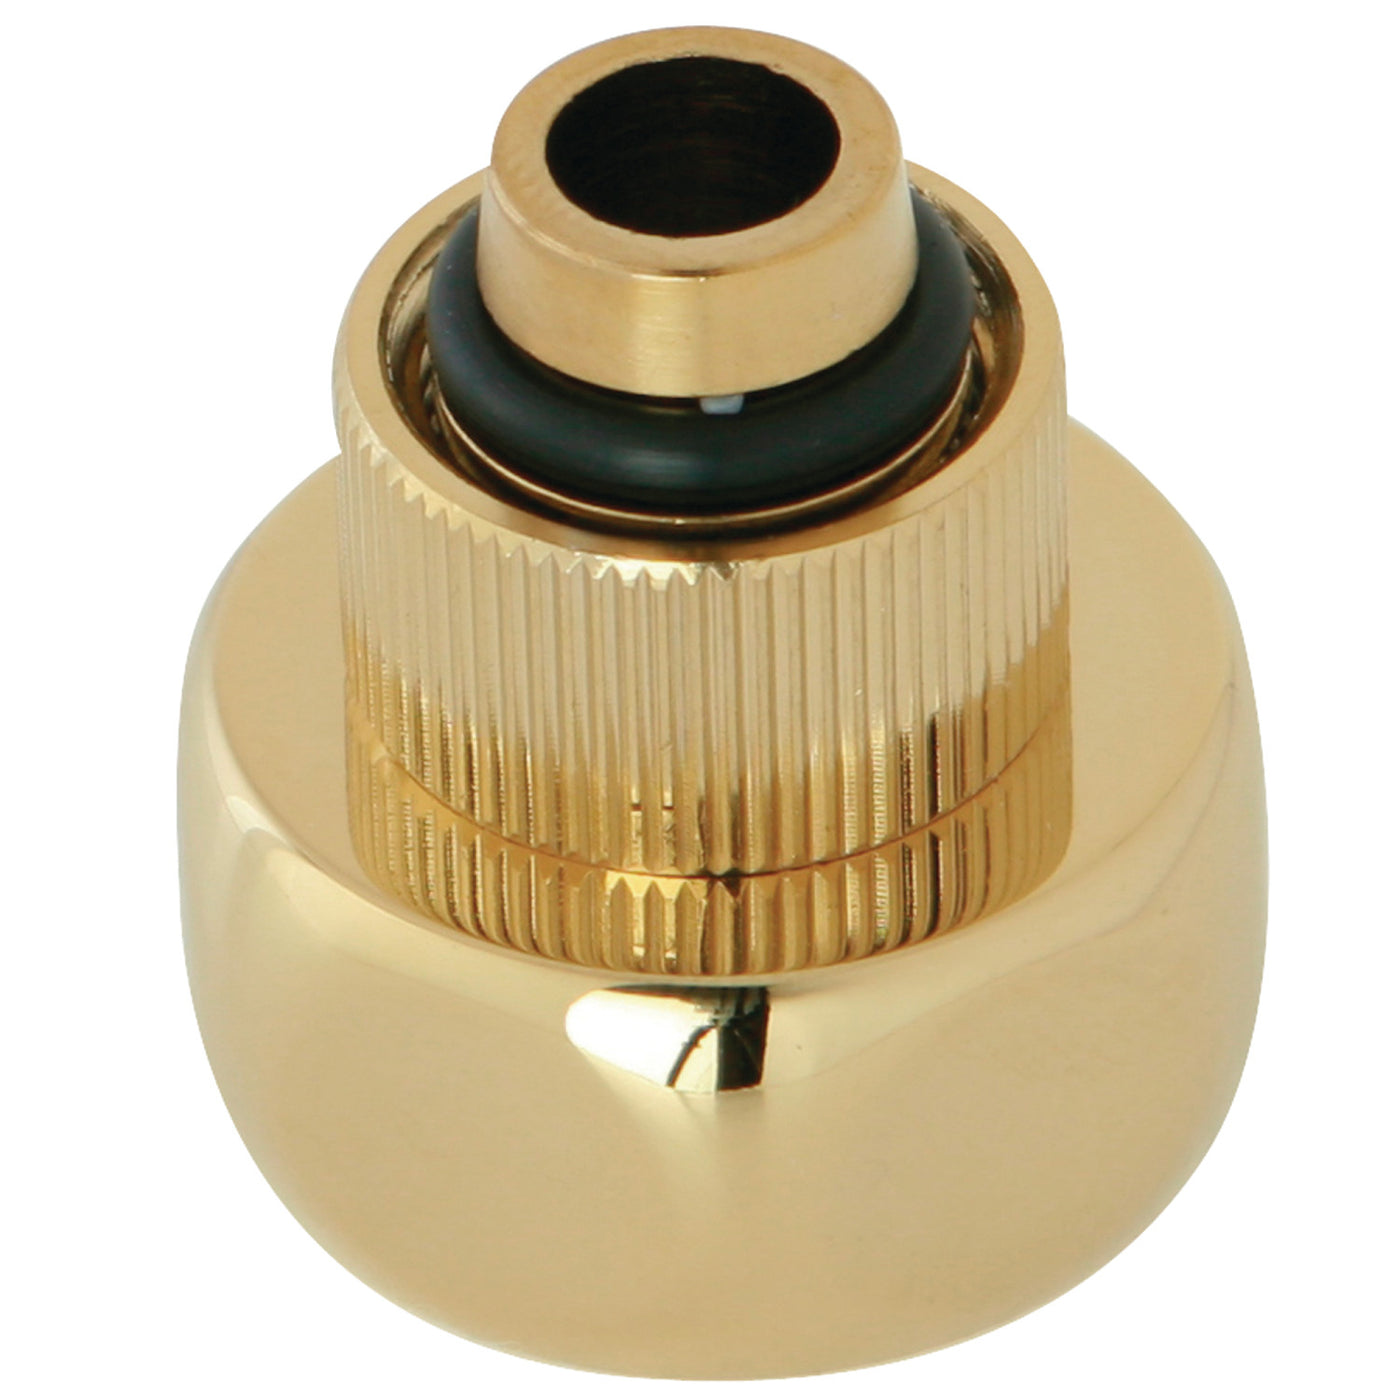 Elements of Design ED2662ADP 3/8" Male NPSM x 3/4" Female NPSM Adapter for CC2662, Polished Brass